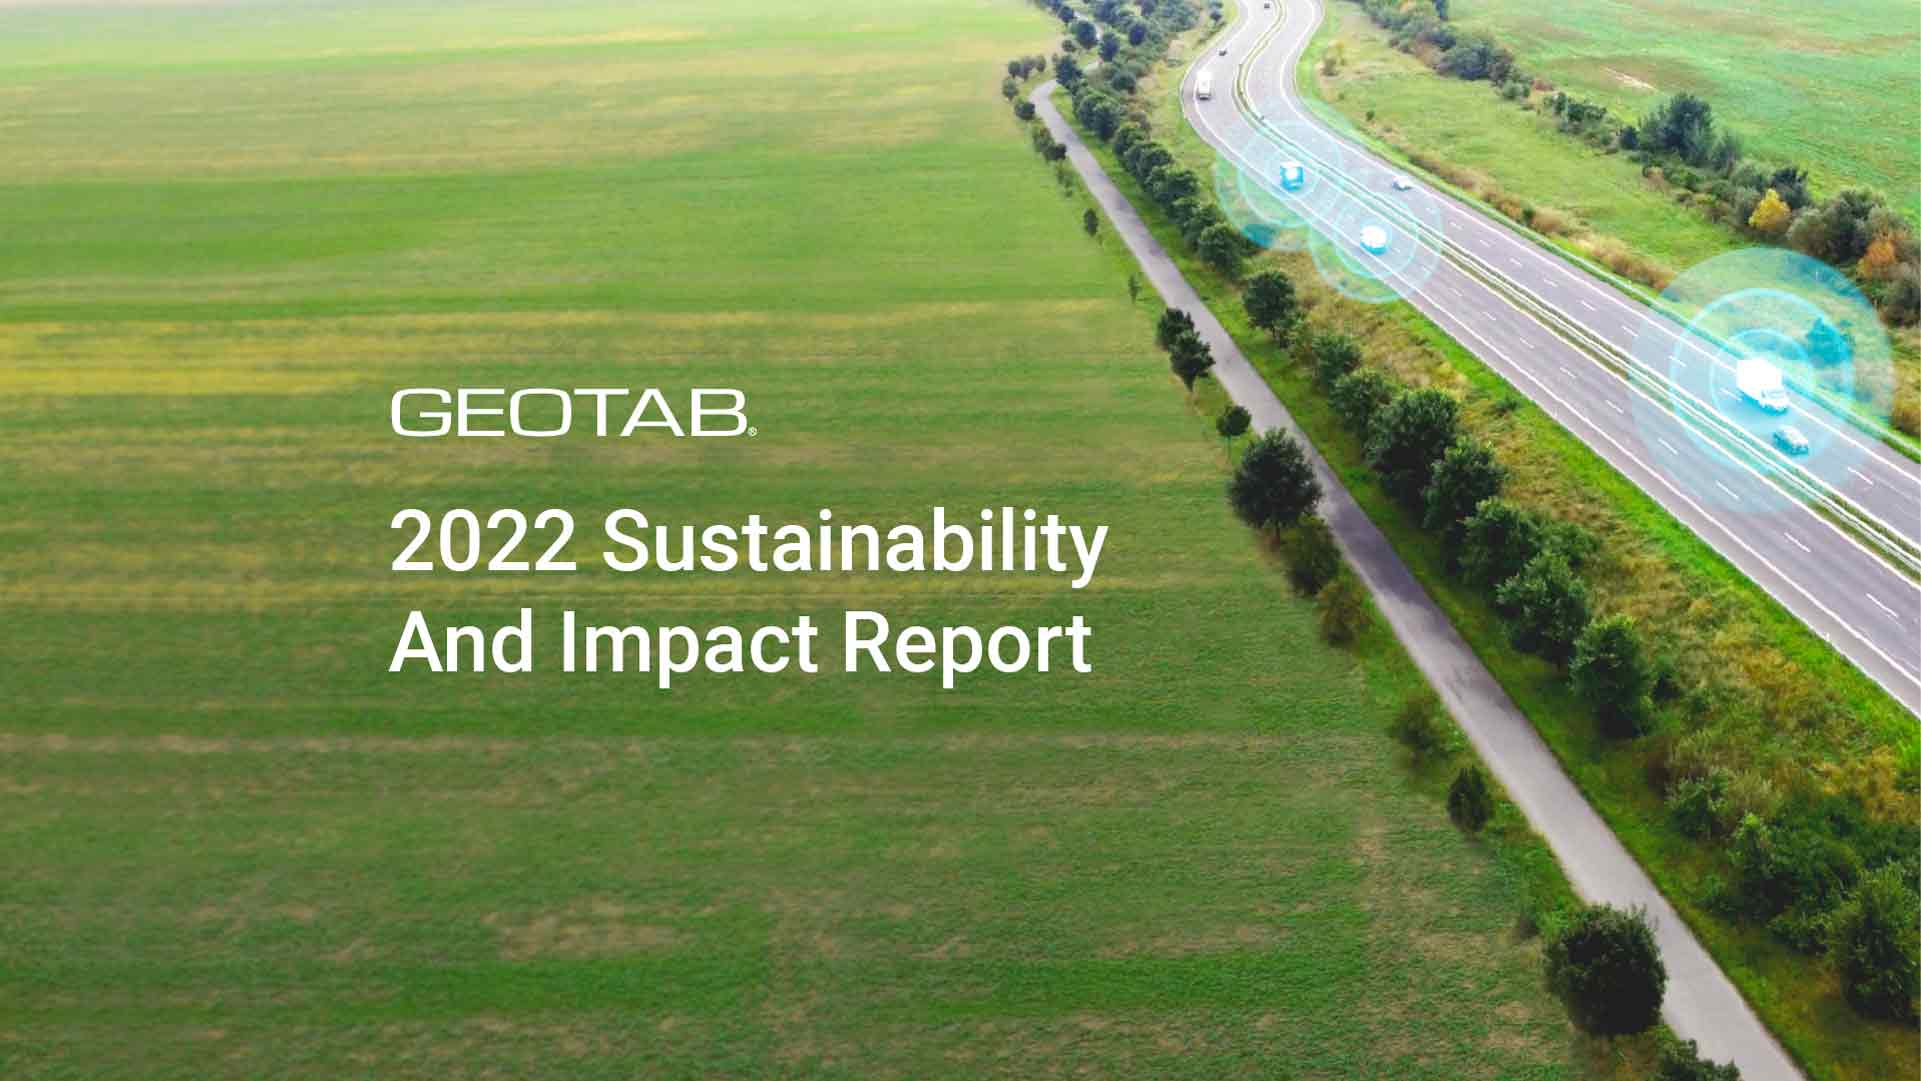 Geotab 2022 Sustainability and Impact Report